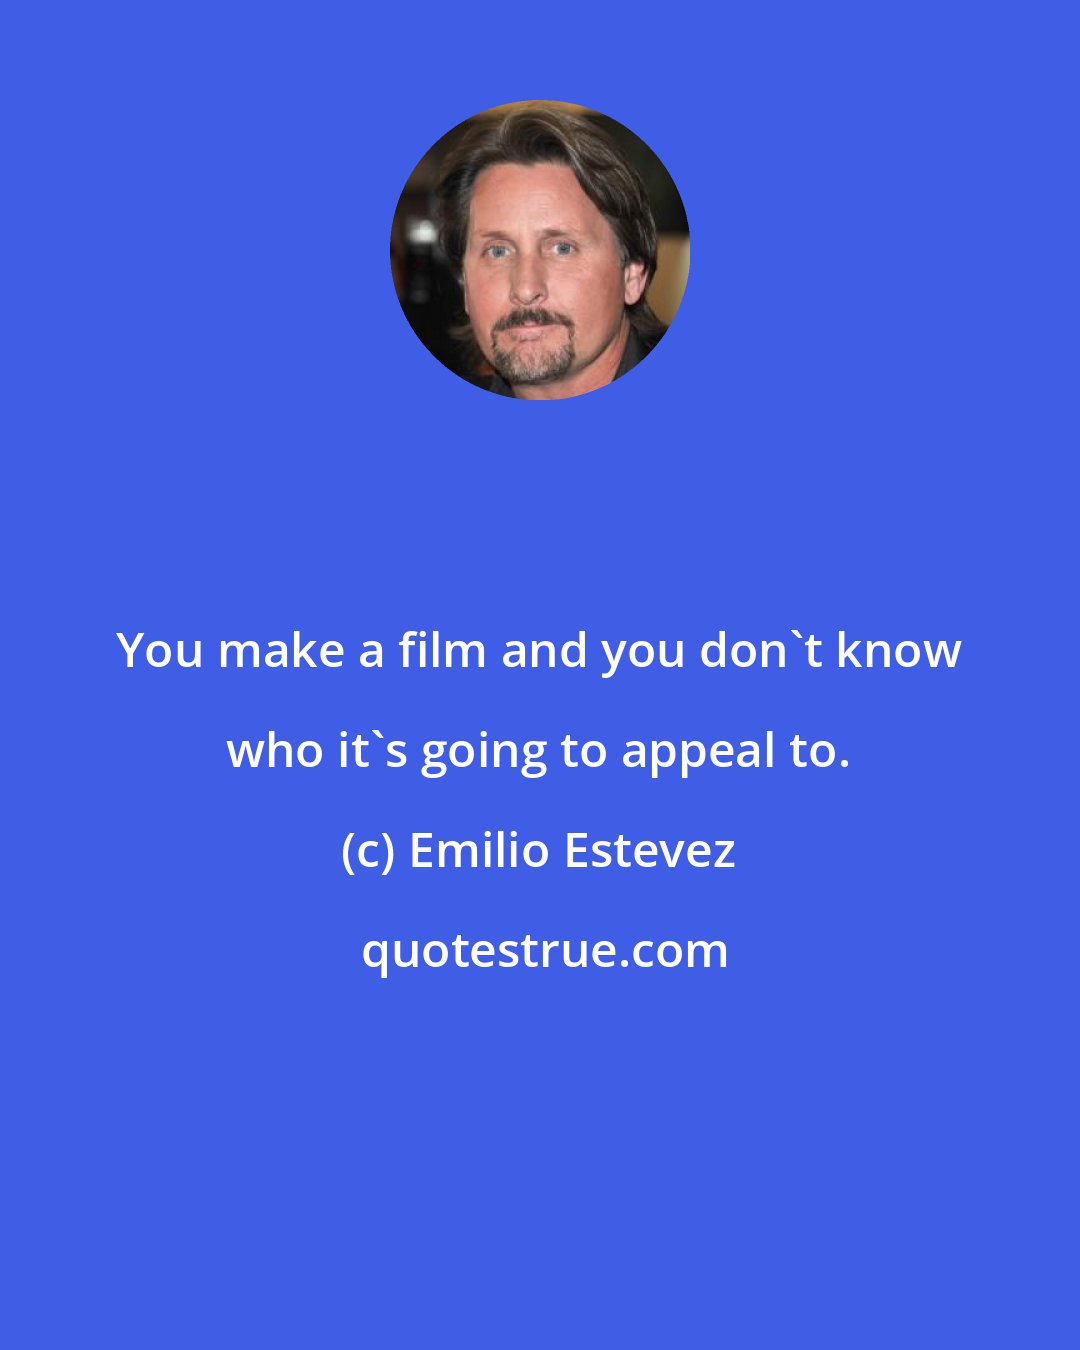 Emilio Estevez: You make a film and you don't know who it's going to appeal to.